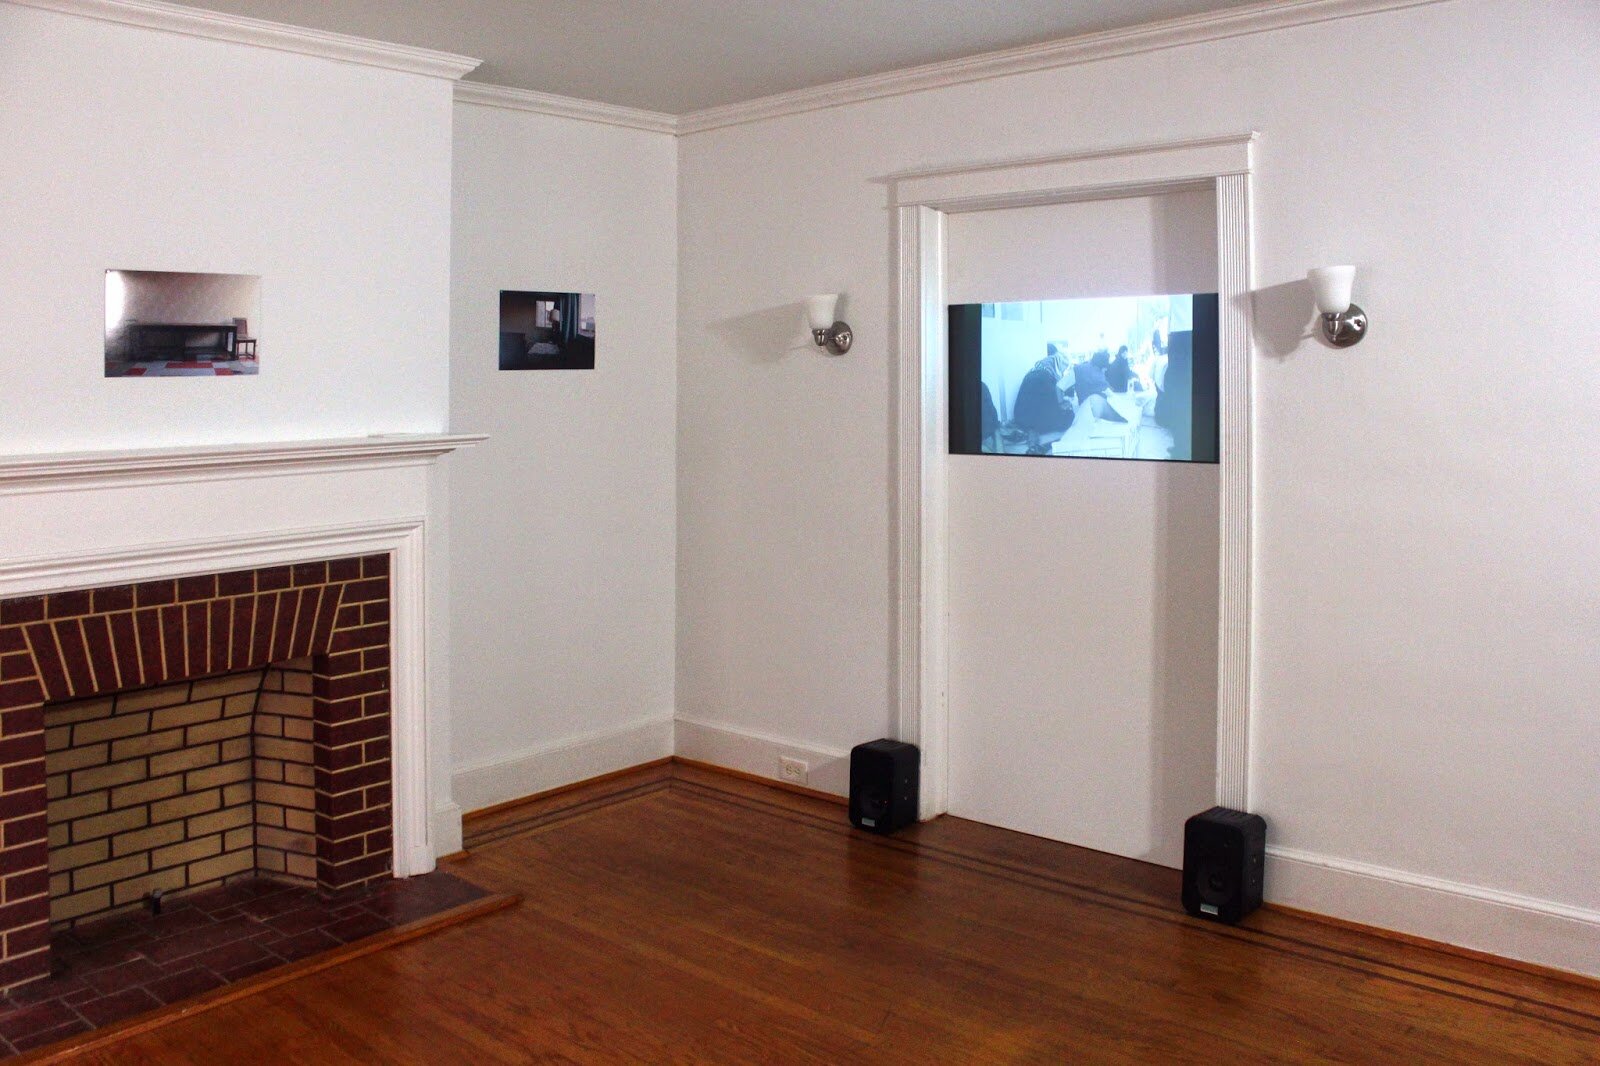  installation view with photographs from&nbsp;  Chambres   &nbsp; (2005)&nbsp;and&nbsp;  Transit  &nbsp;(2004) 